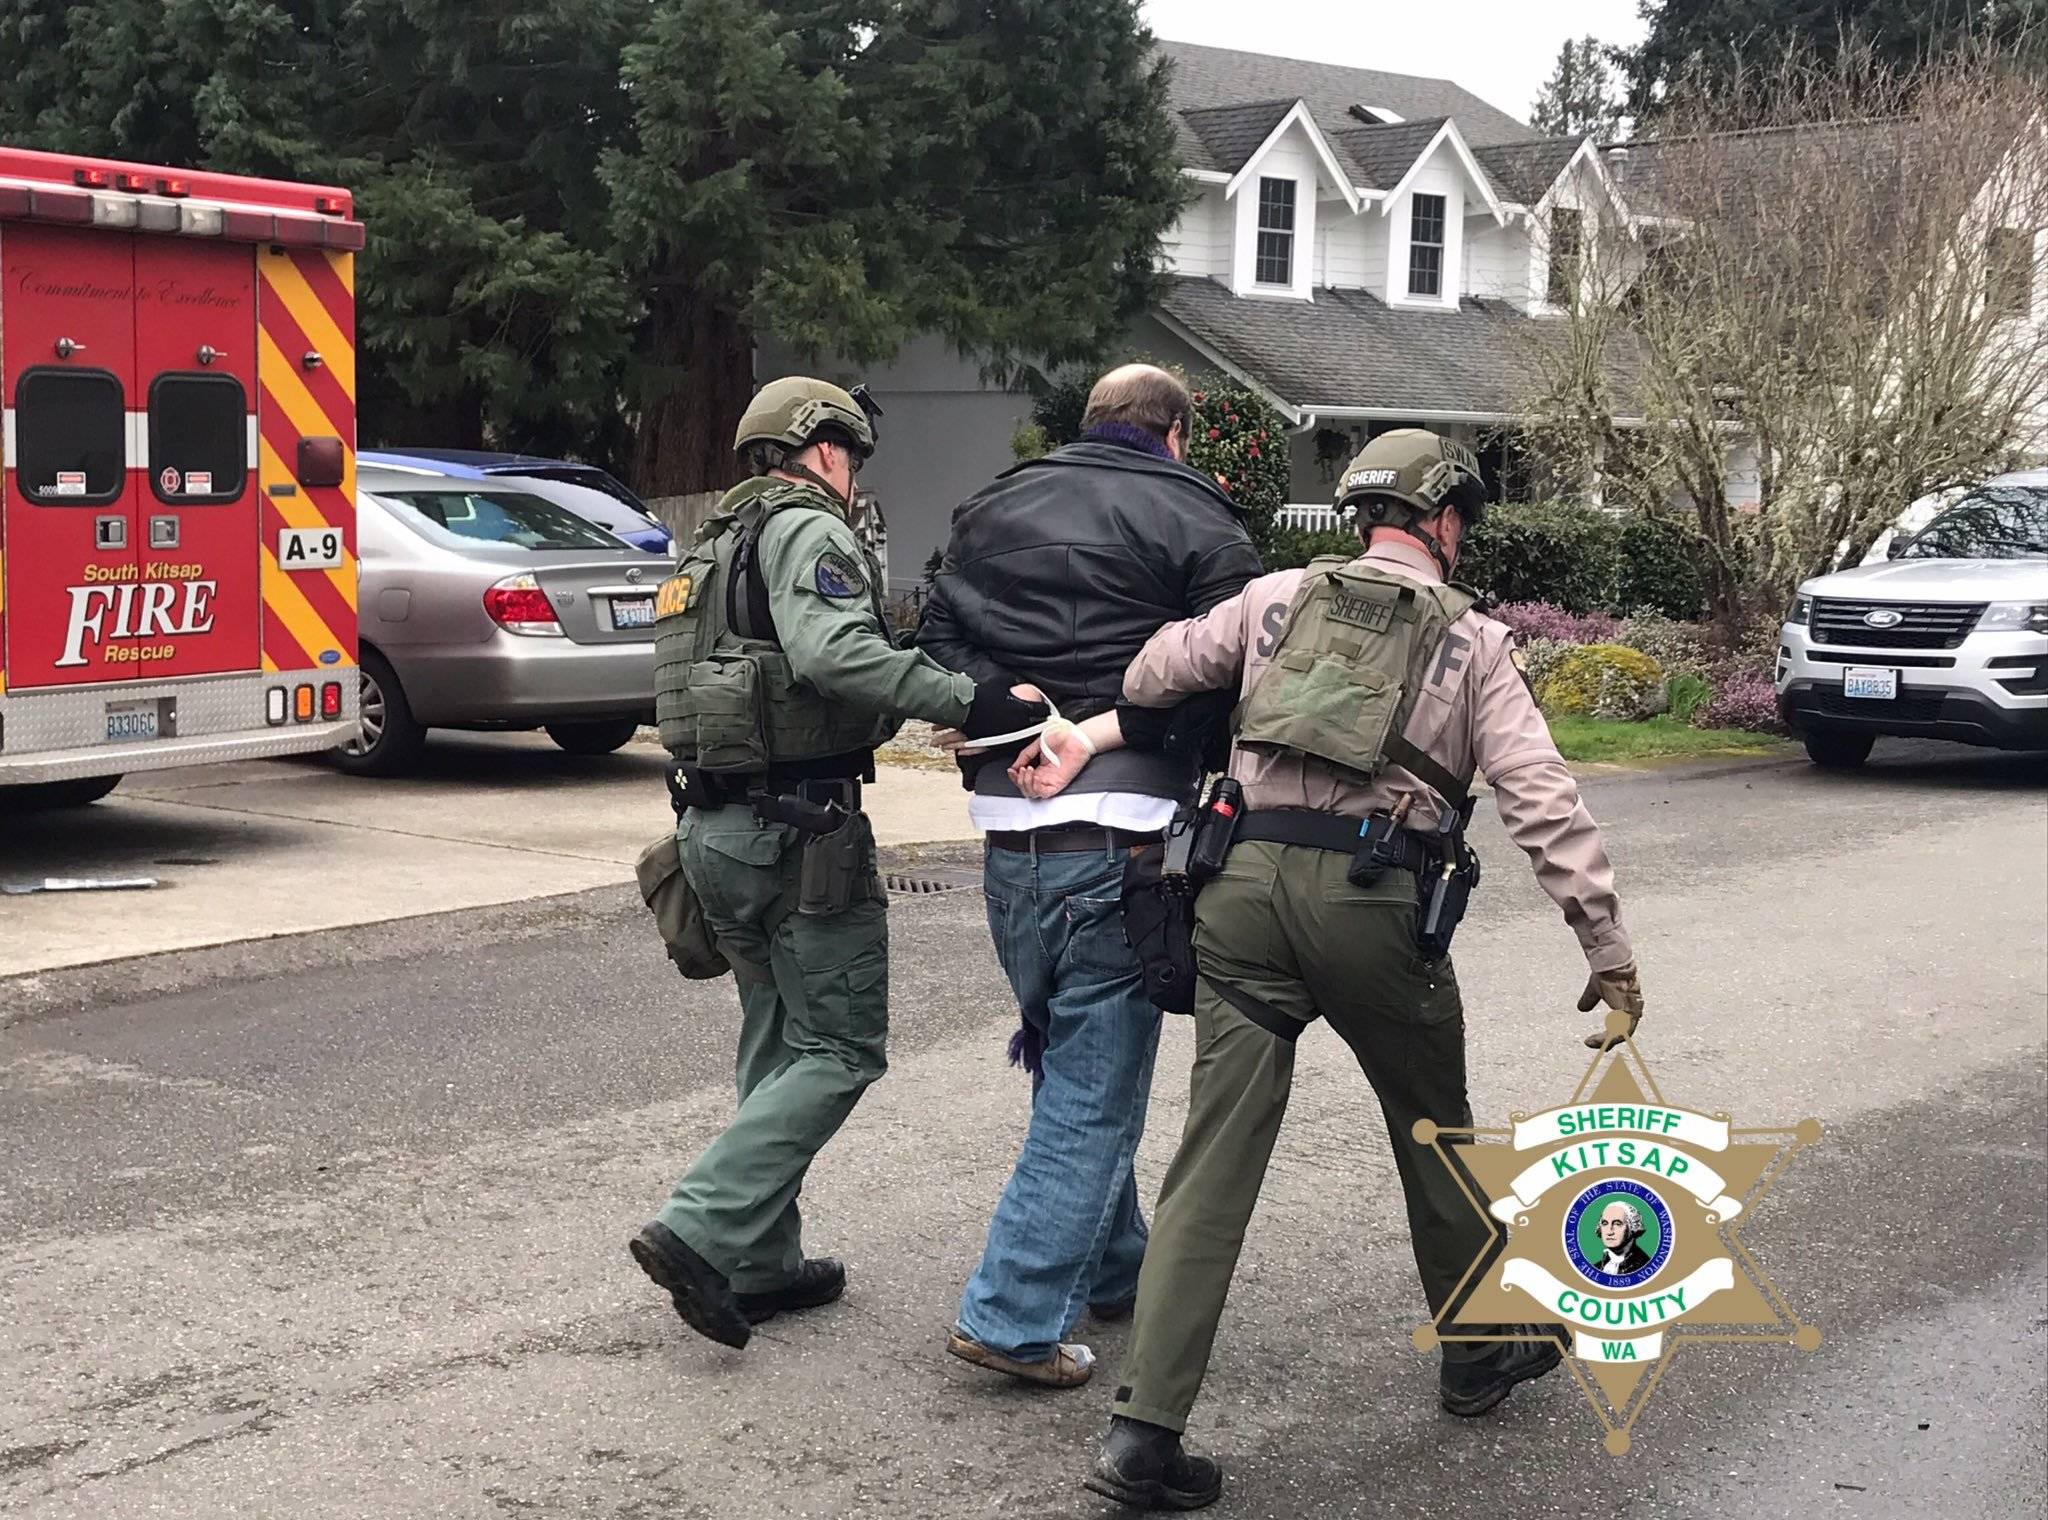 Man arrested after barricading home in weeklong standoff